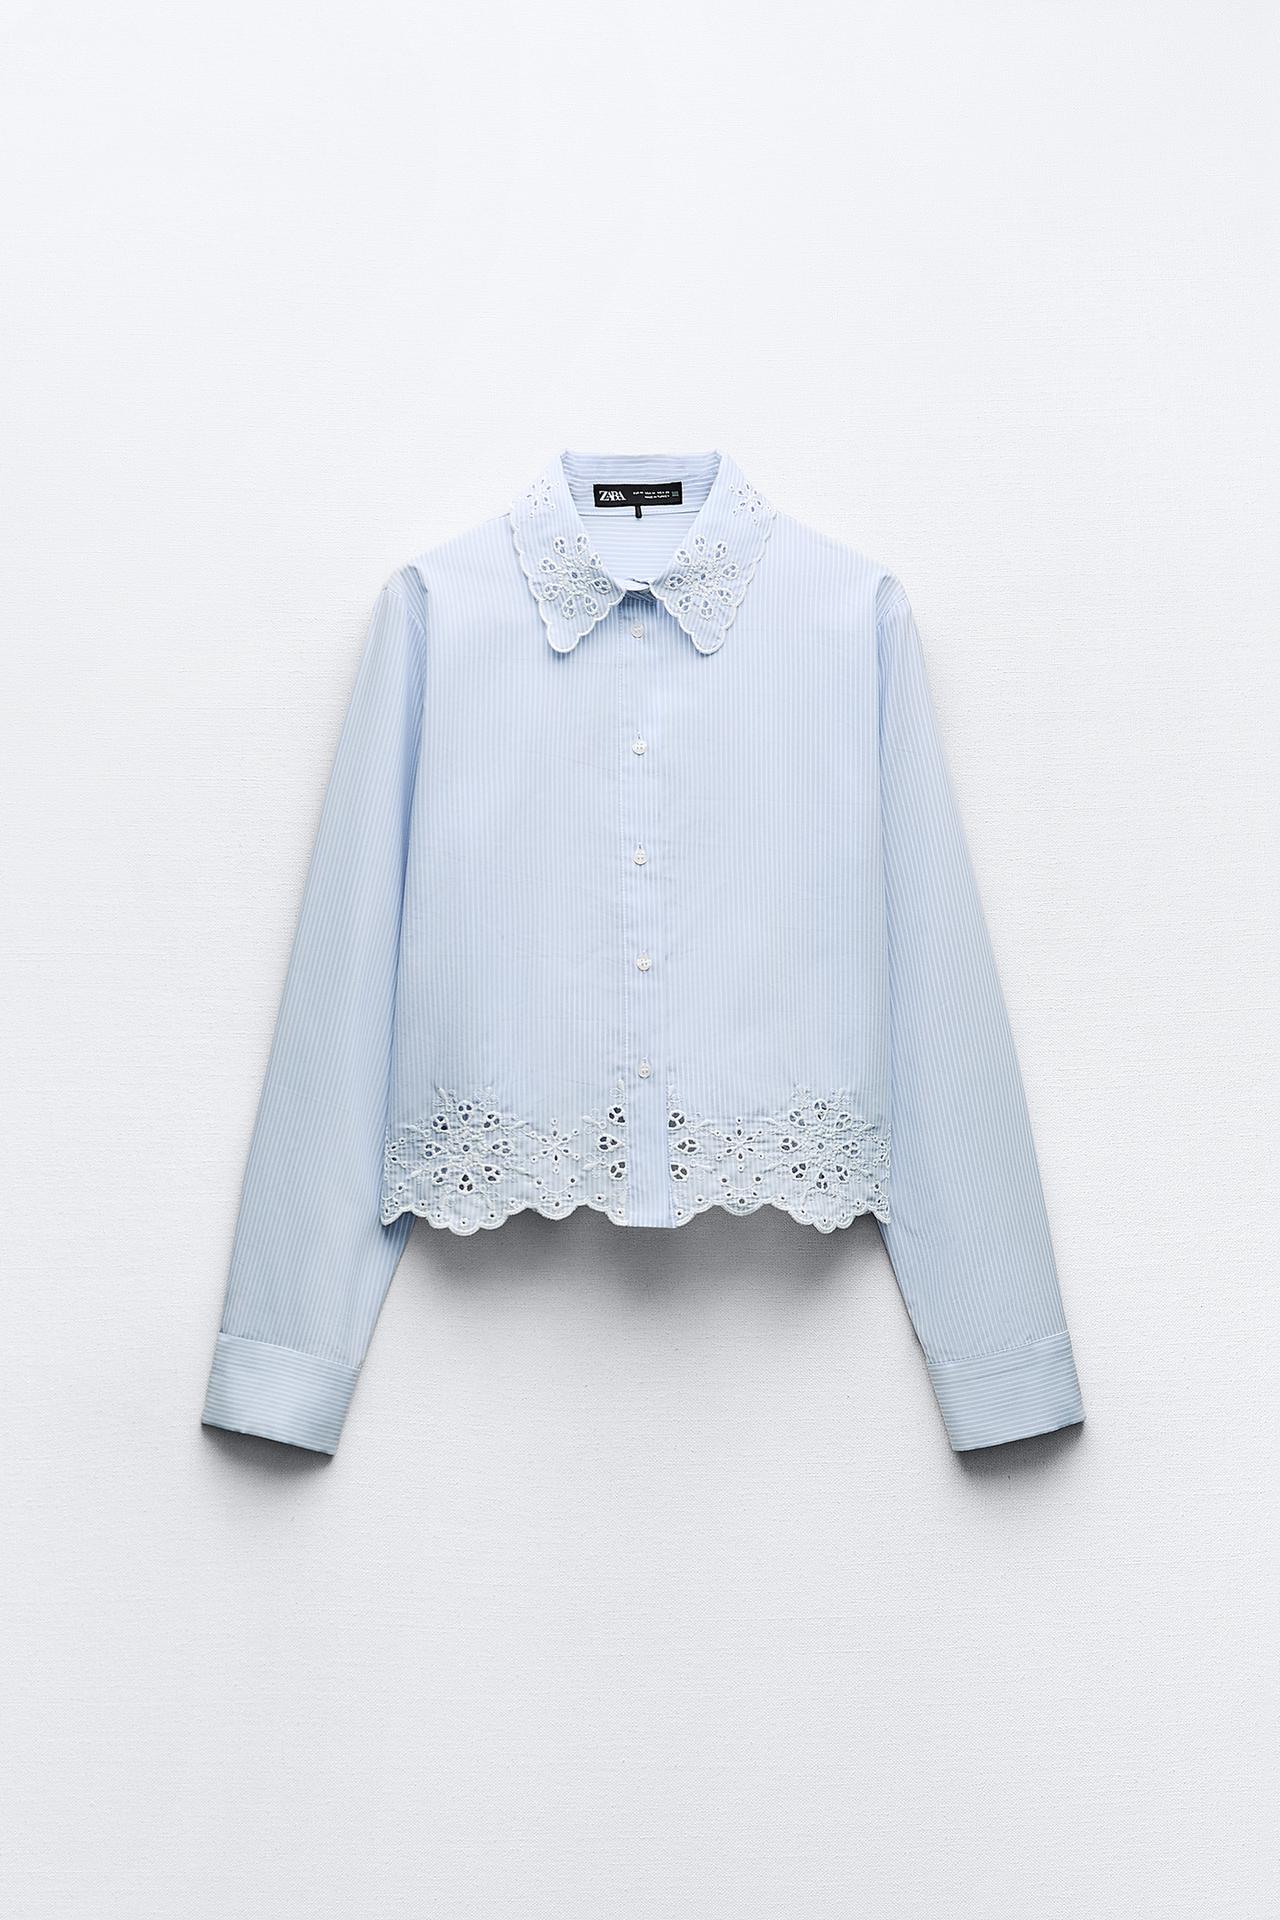 A cropped striped shirt from Zara, featuring light blue vertical stripes with a contrasting white, scalloped lace collar and hem. The shirt has a front button closure and full-length sleeves with buttoned cuffs. The piece is displayed on a neutral background, accentuating its delicate and feminine design.